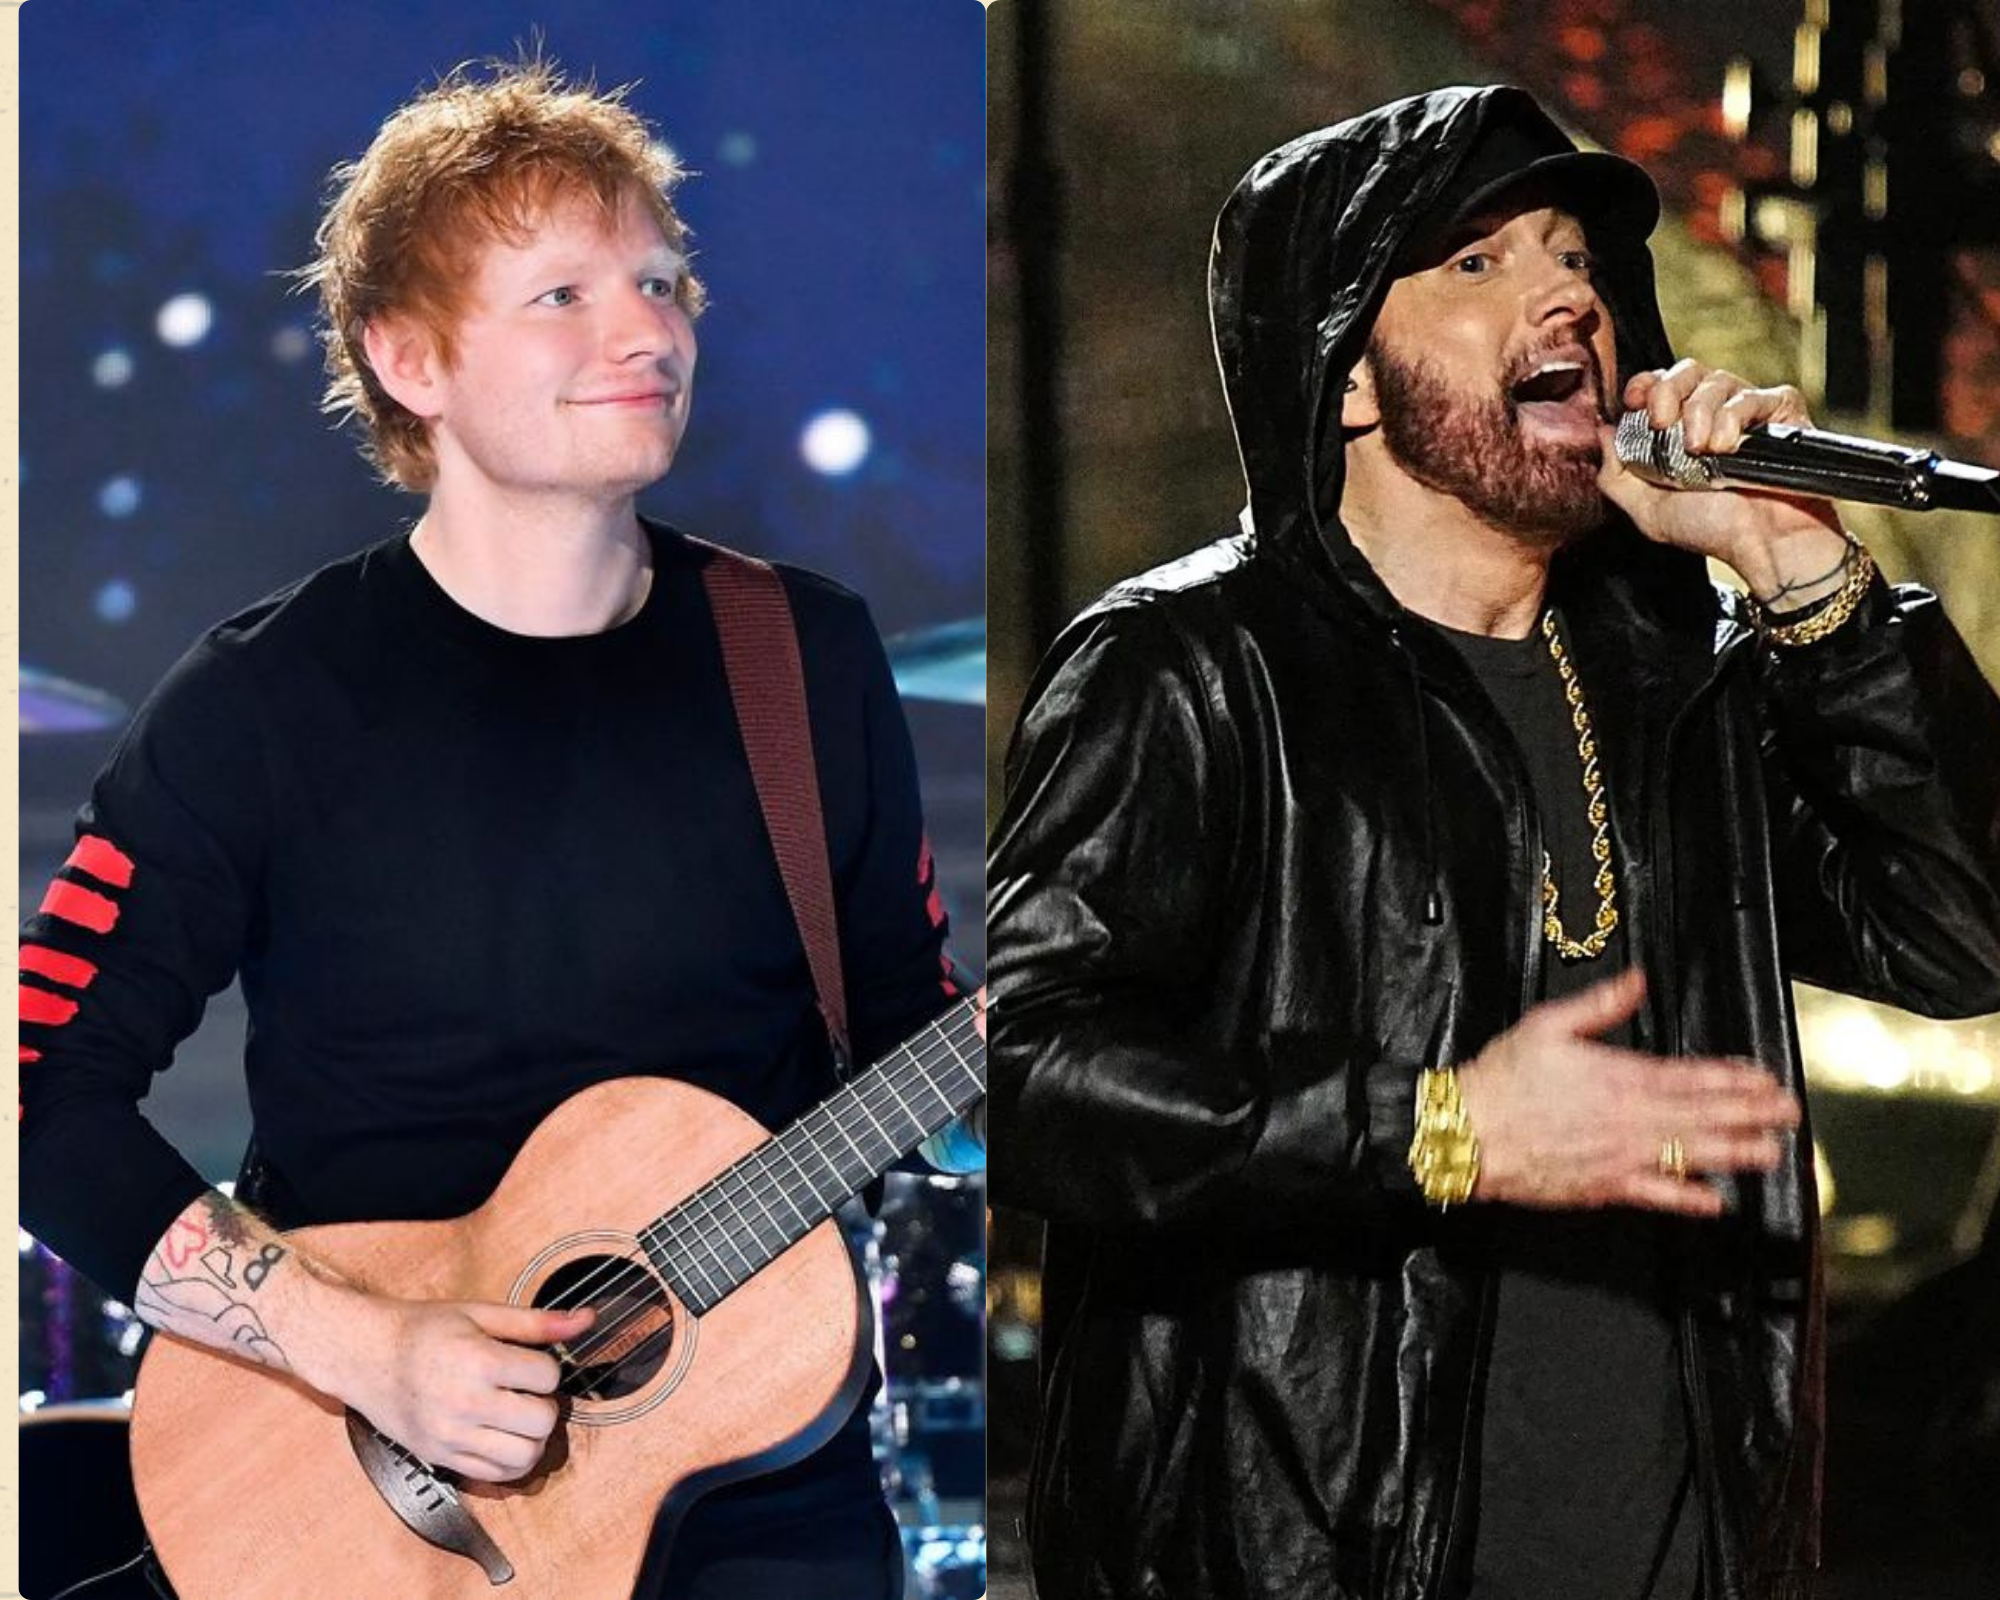 Ed Sheeran Reveals 4 Tracks with Eminem, 1 Possibly on New Album! [Video]